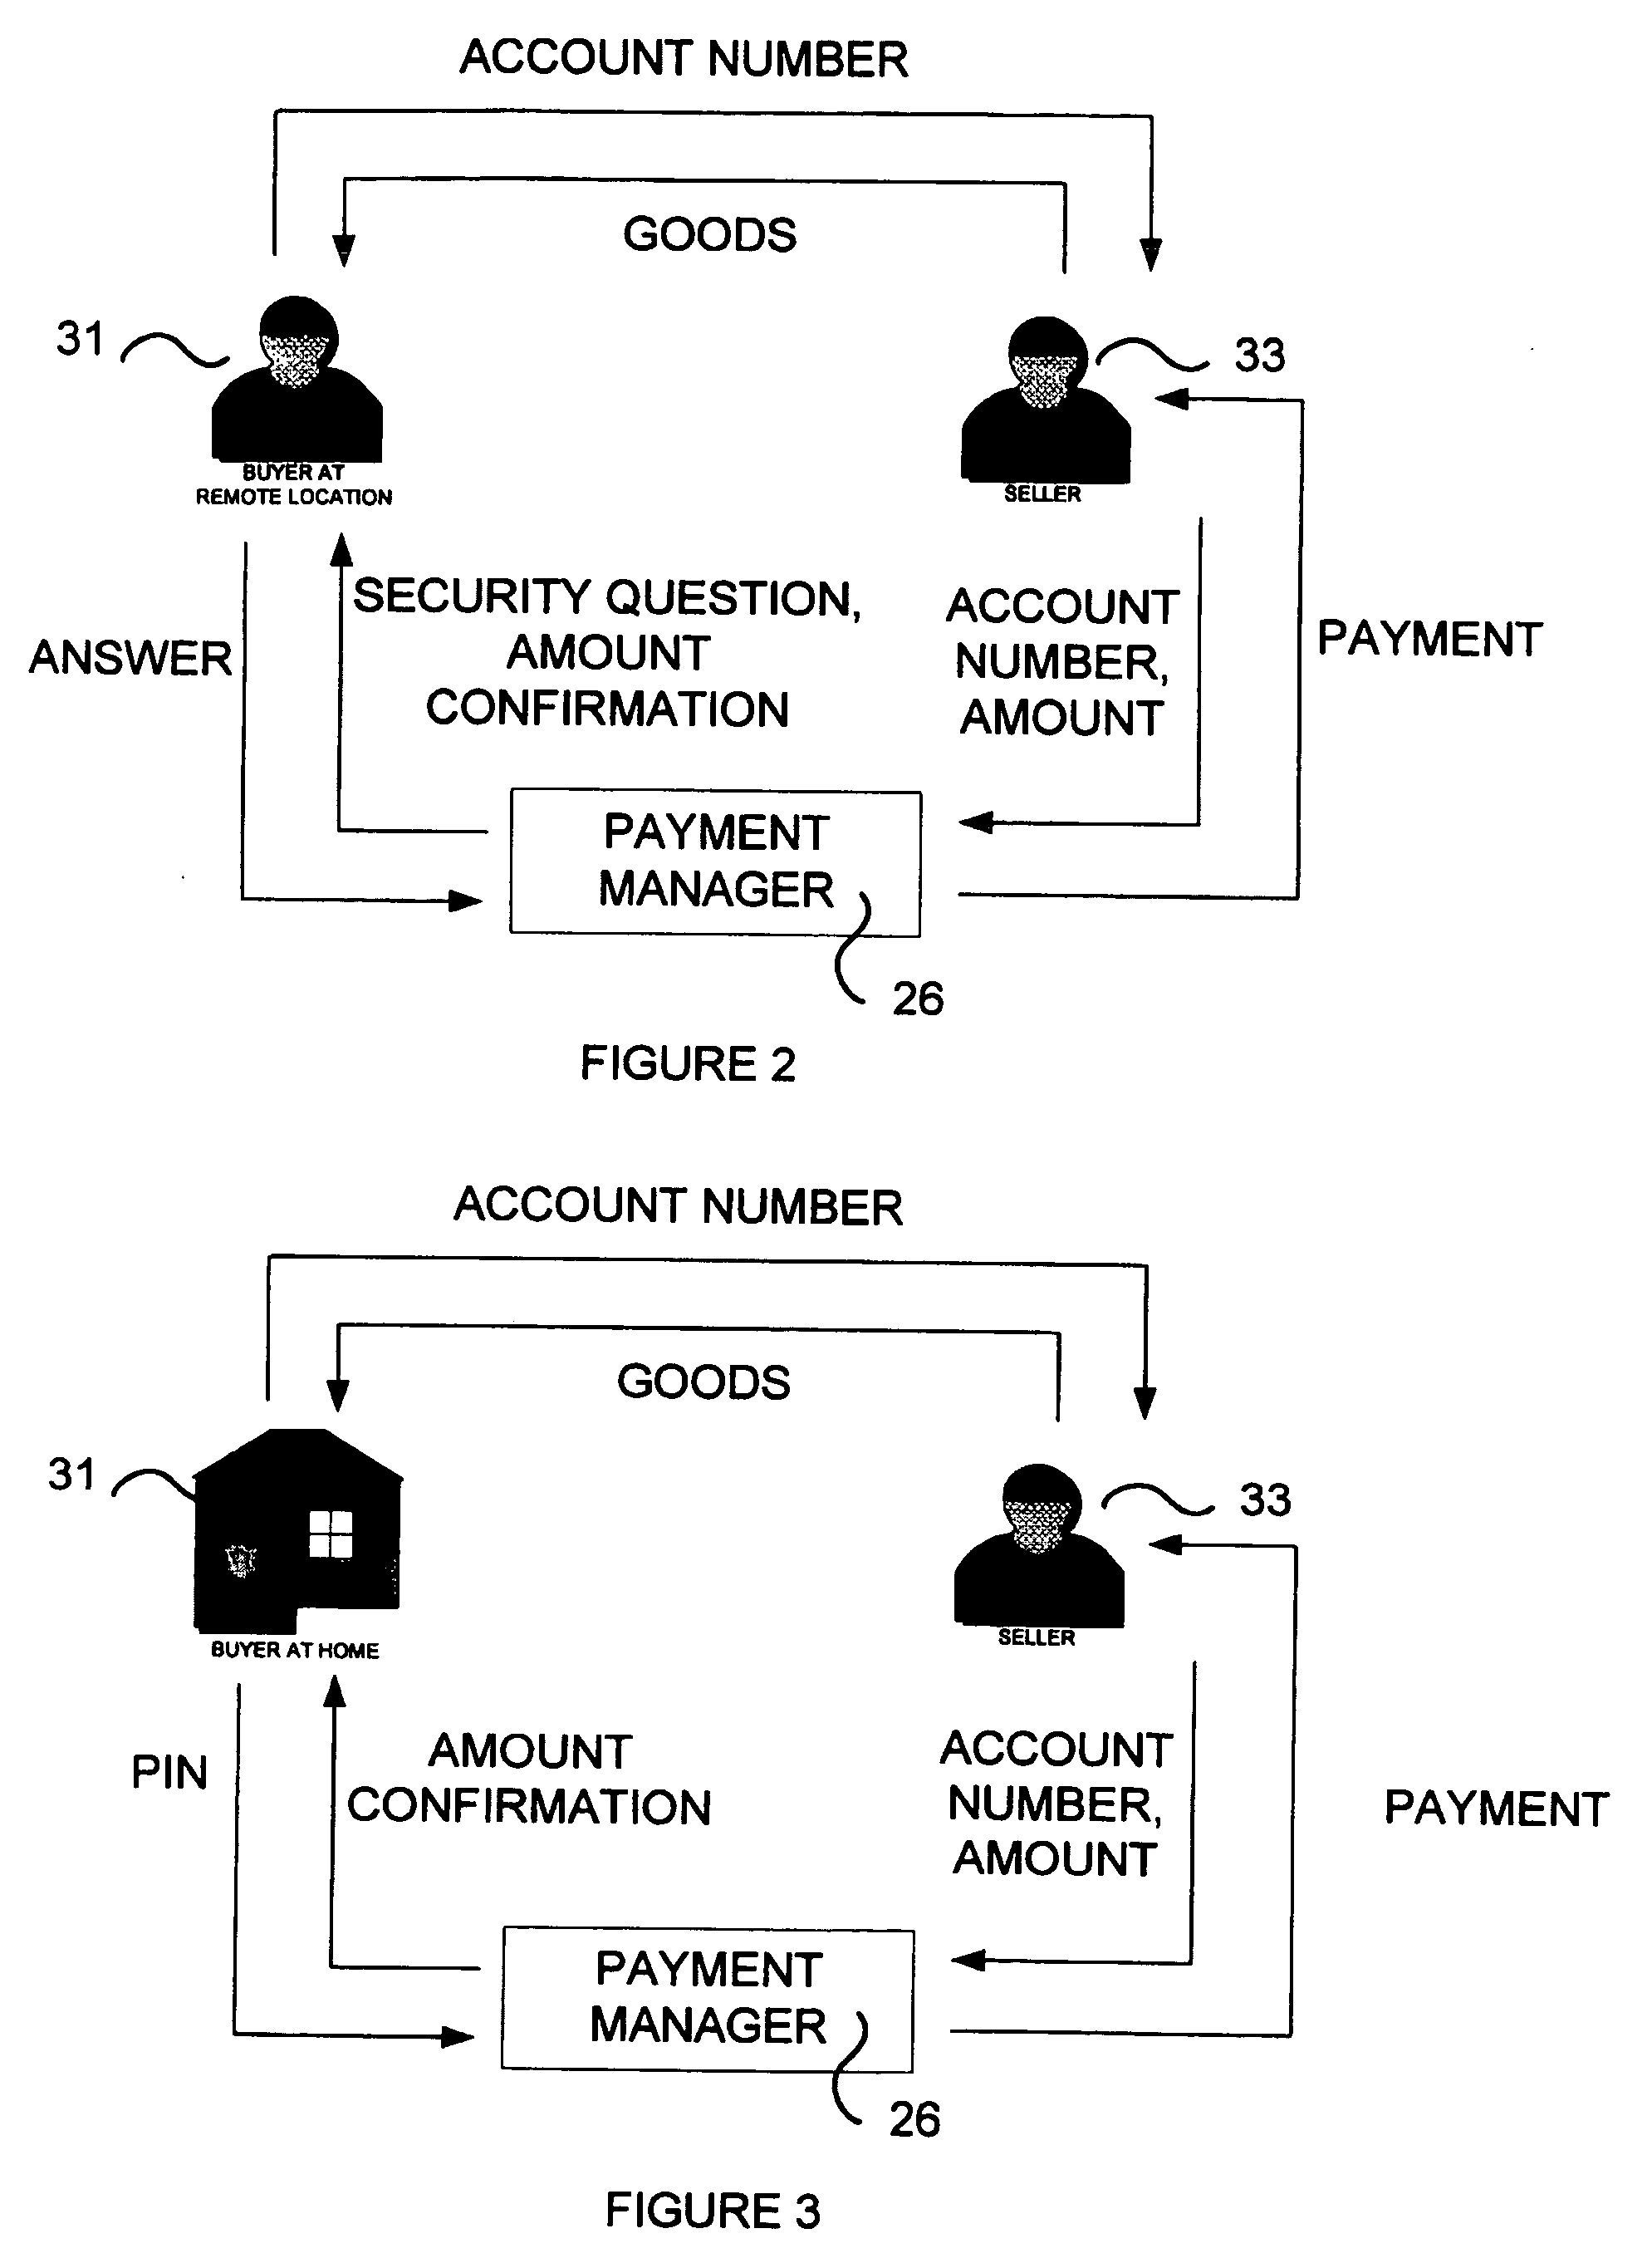 Method for securing a payment transaction over a public network